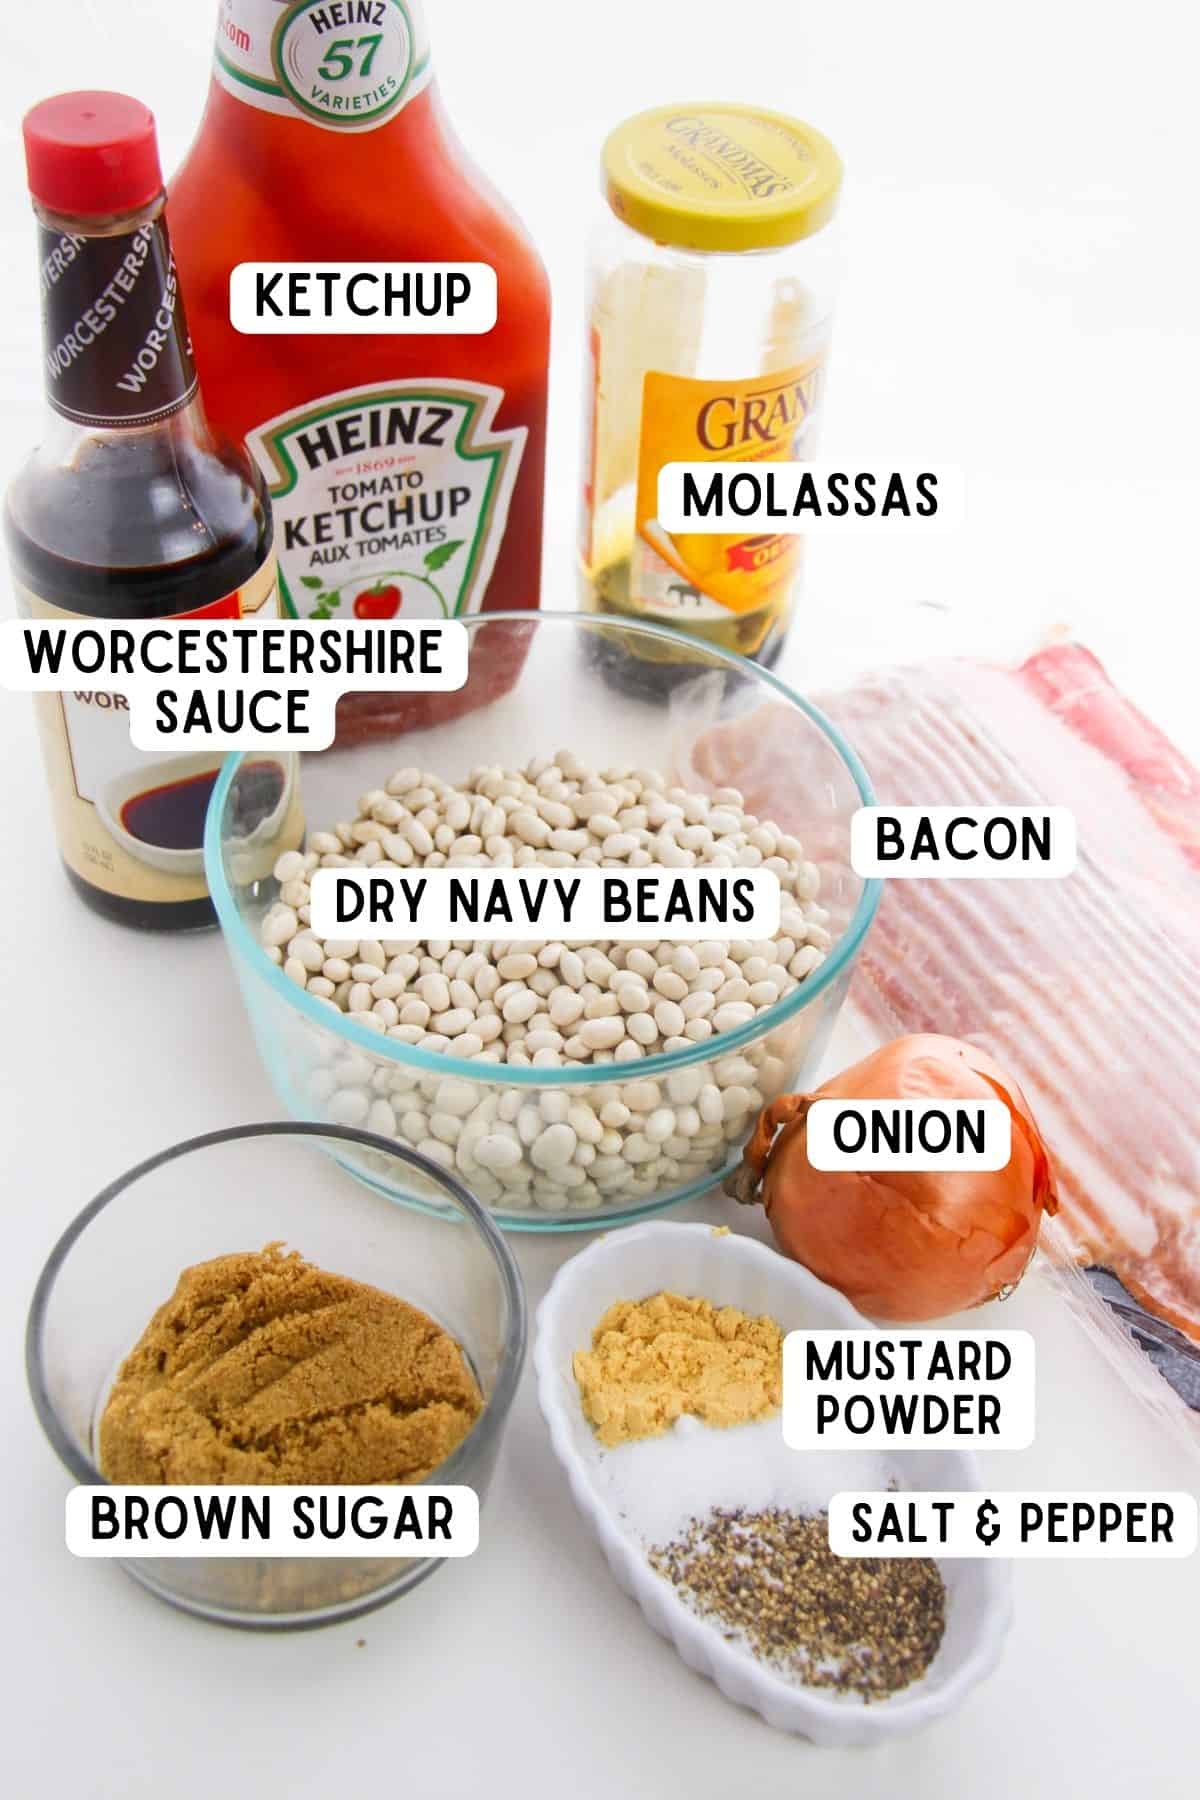 Ketchup, molasses, Worcestershire sauce, dry navy beans, onion, bacon, mustard powder, brown sugar, salt, and pepper.